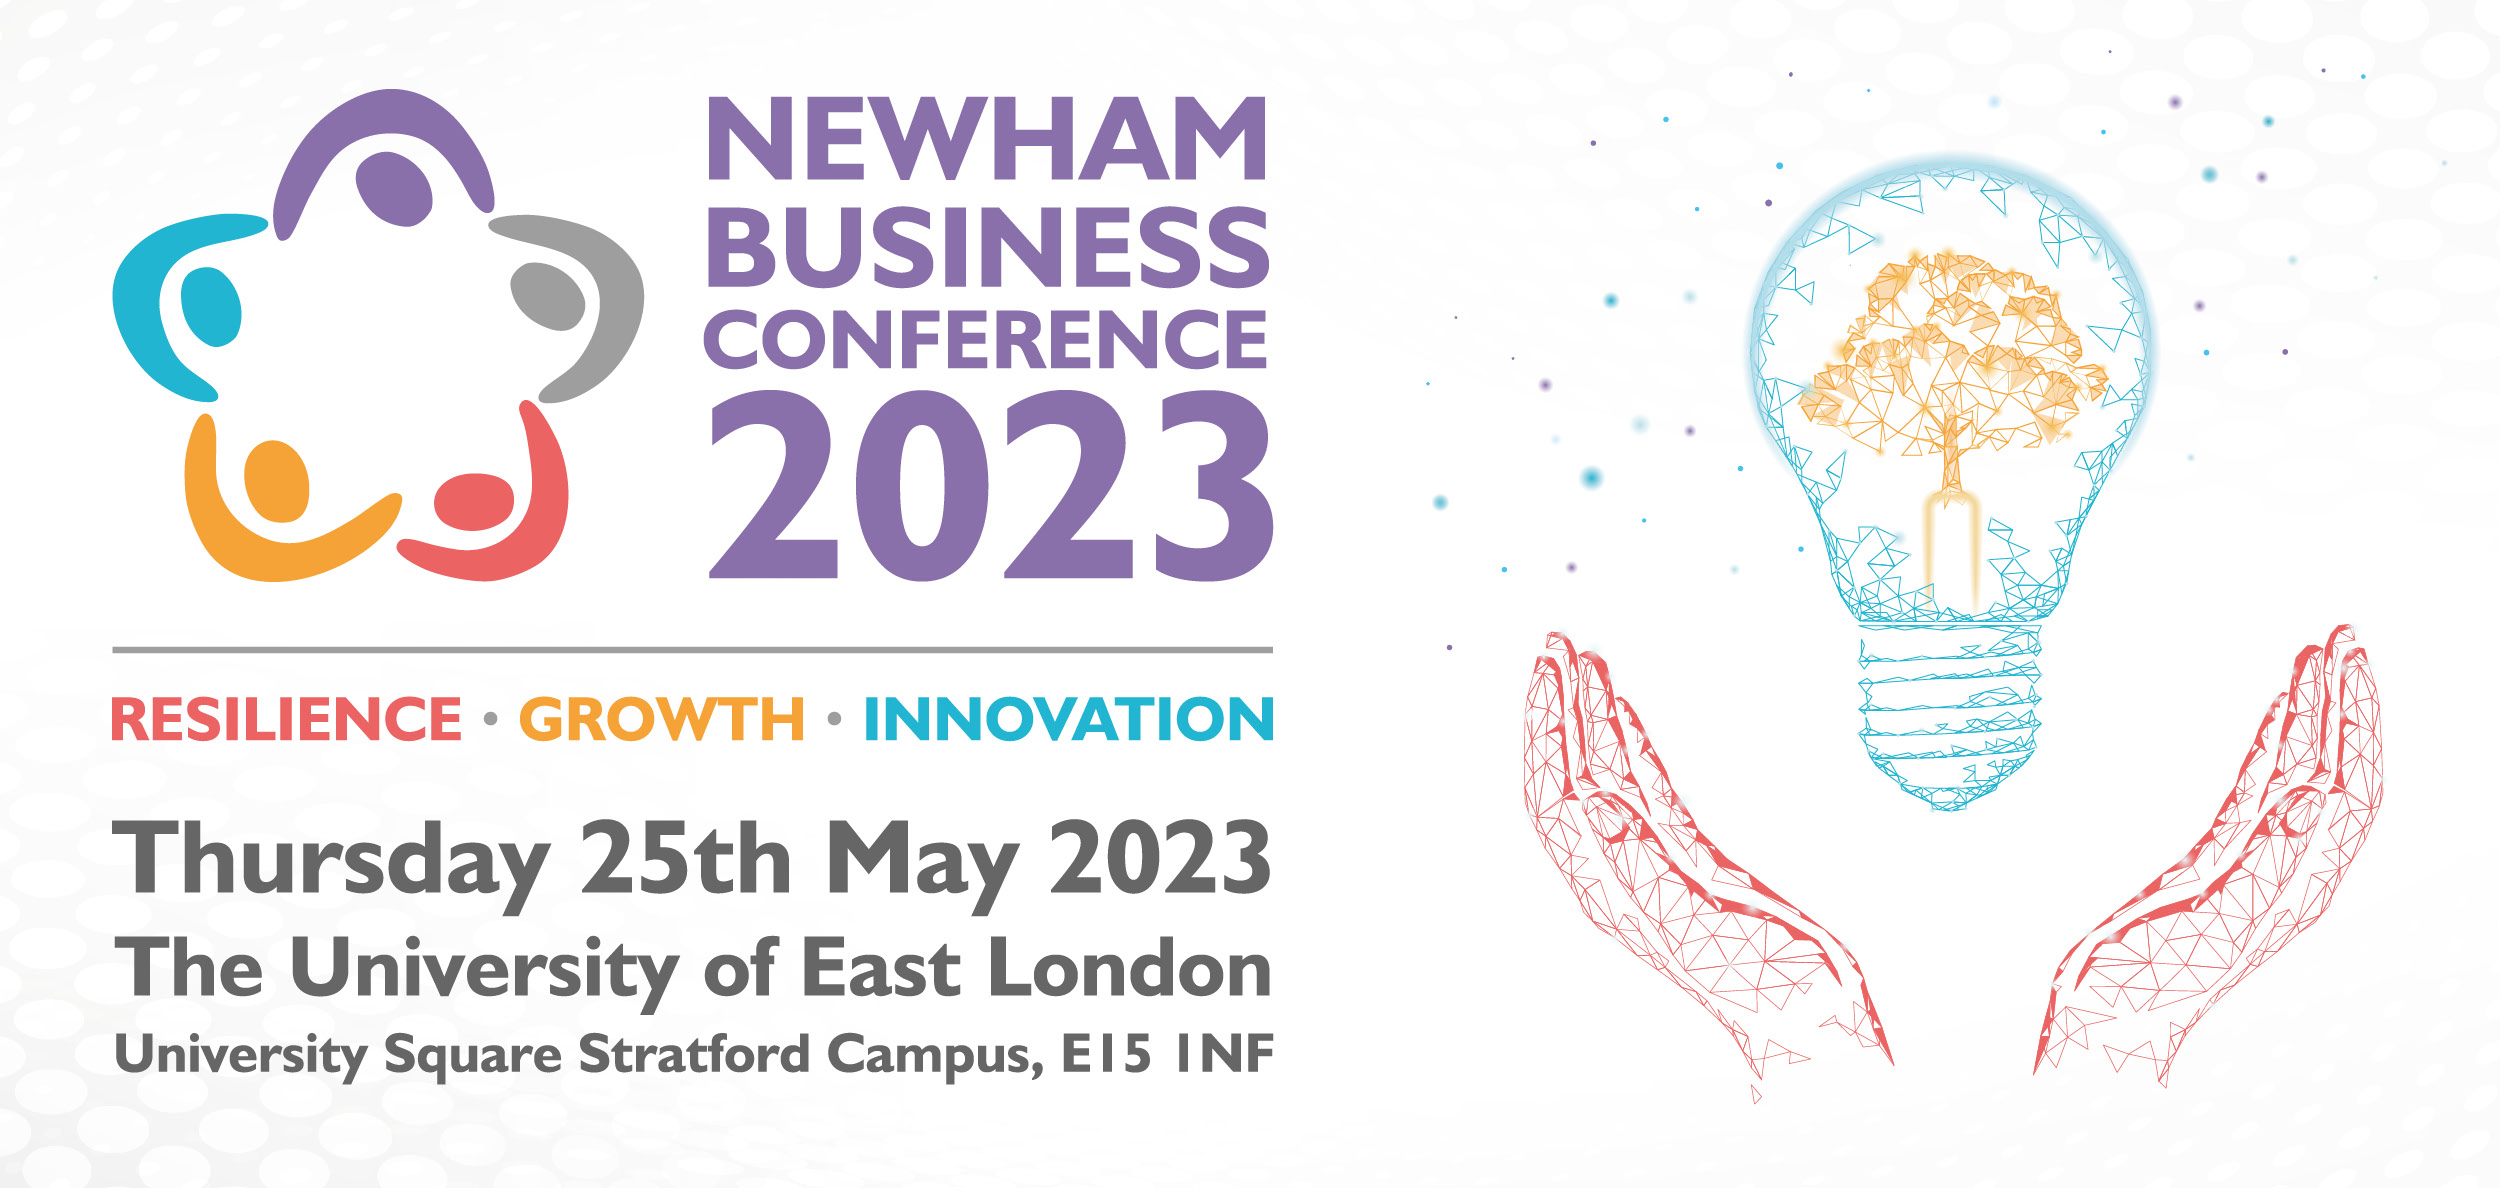 Annual Business Conference 2023 Newham Council